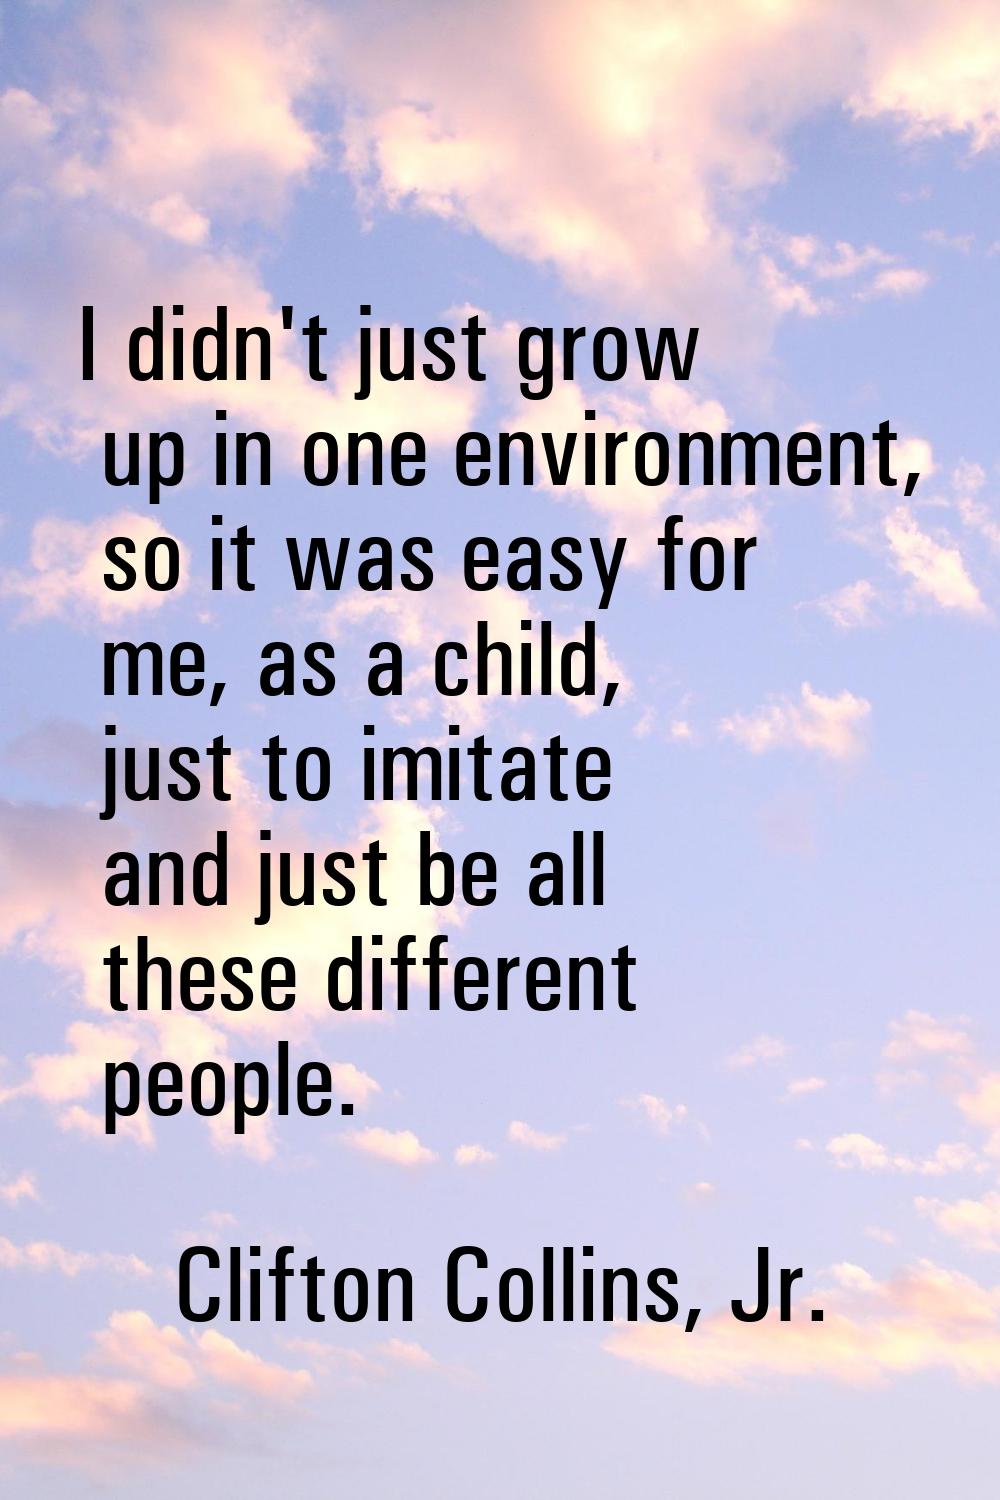 I didn't just grow up in one environment, so it was easy for me, as a child, just to imitate and ju